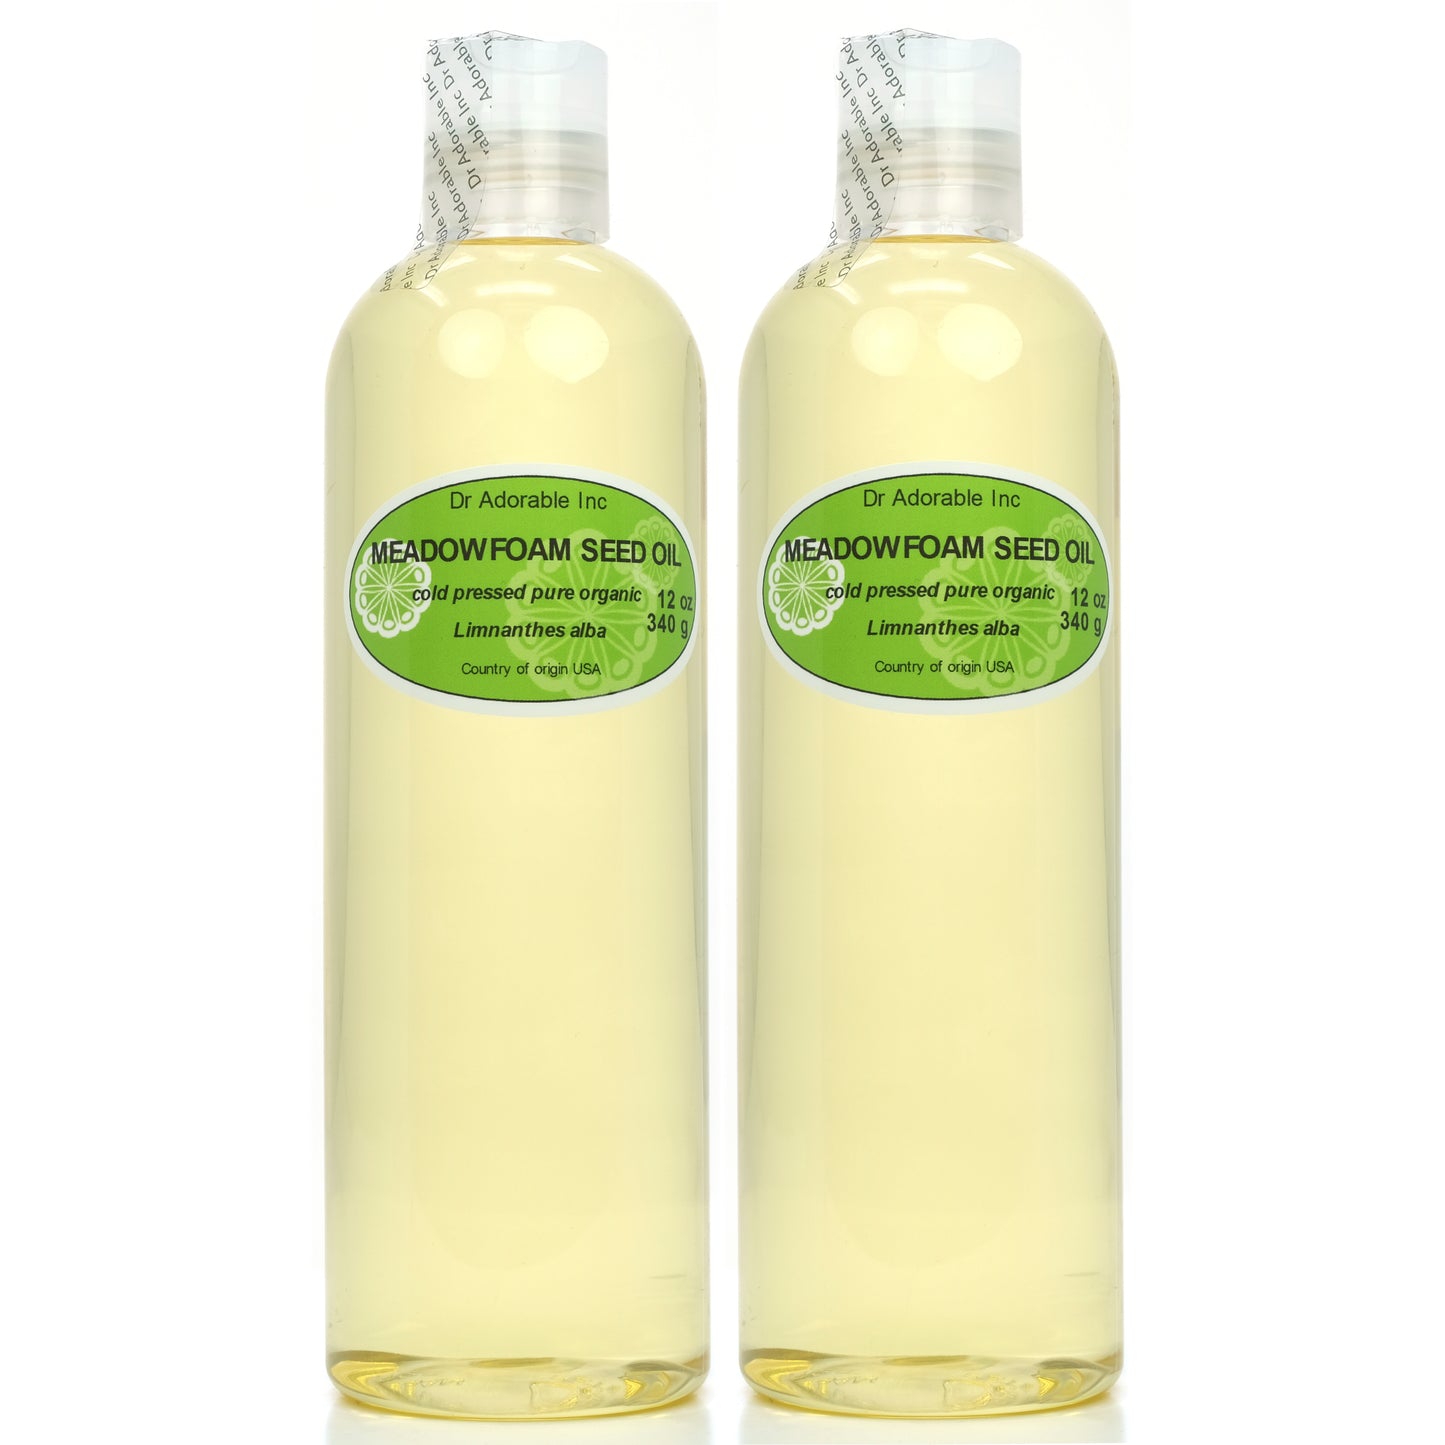 Meadowfoam Seed Oil - 100% Pure Natural Organic Cold Pressed